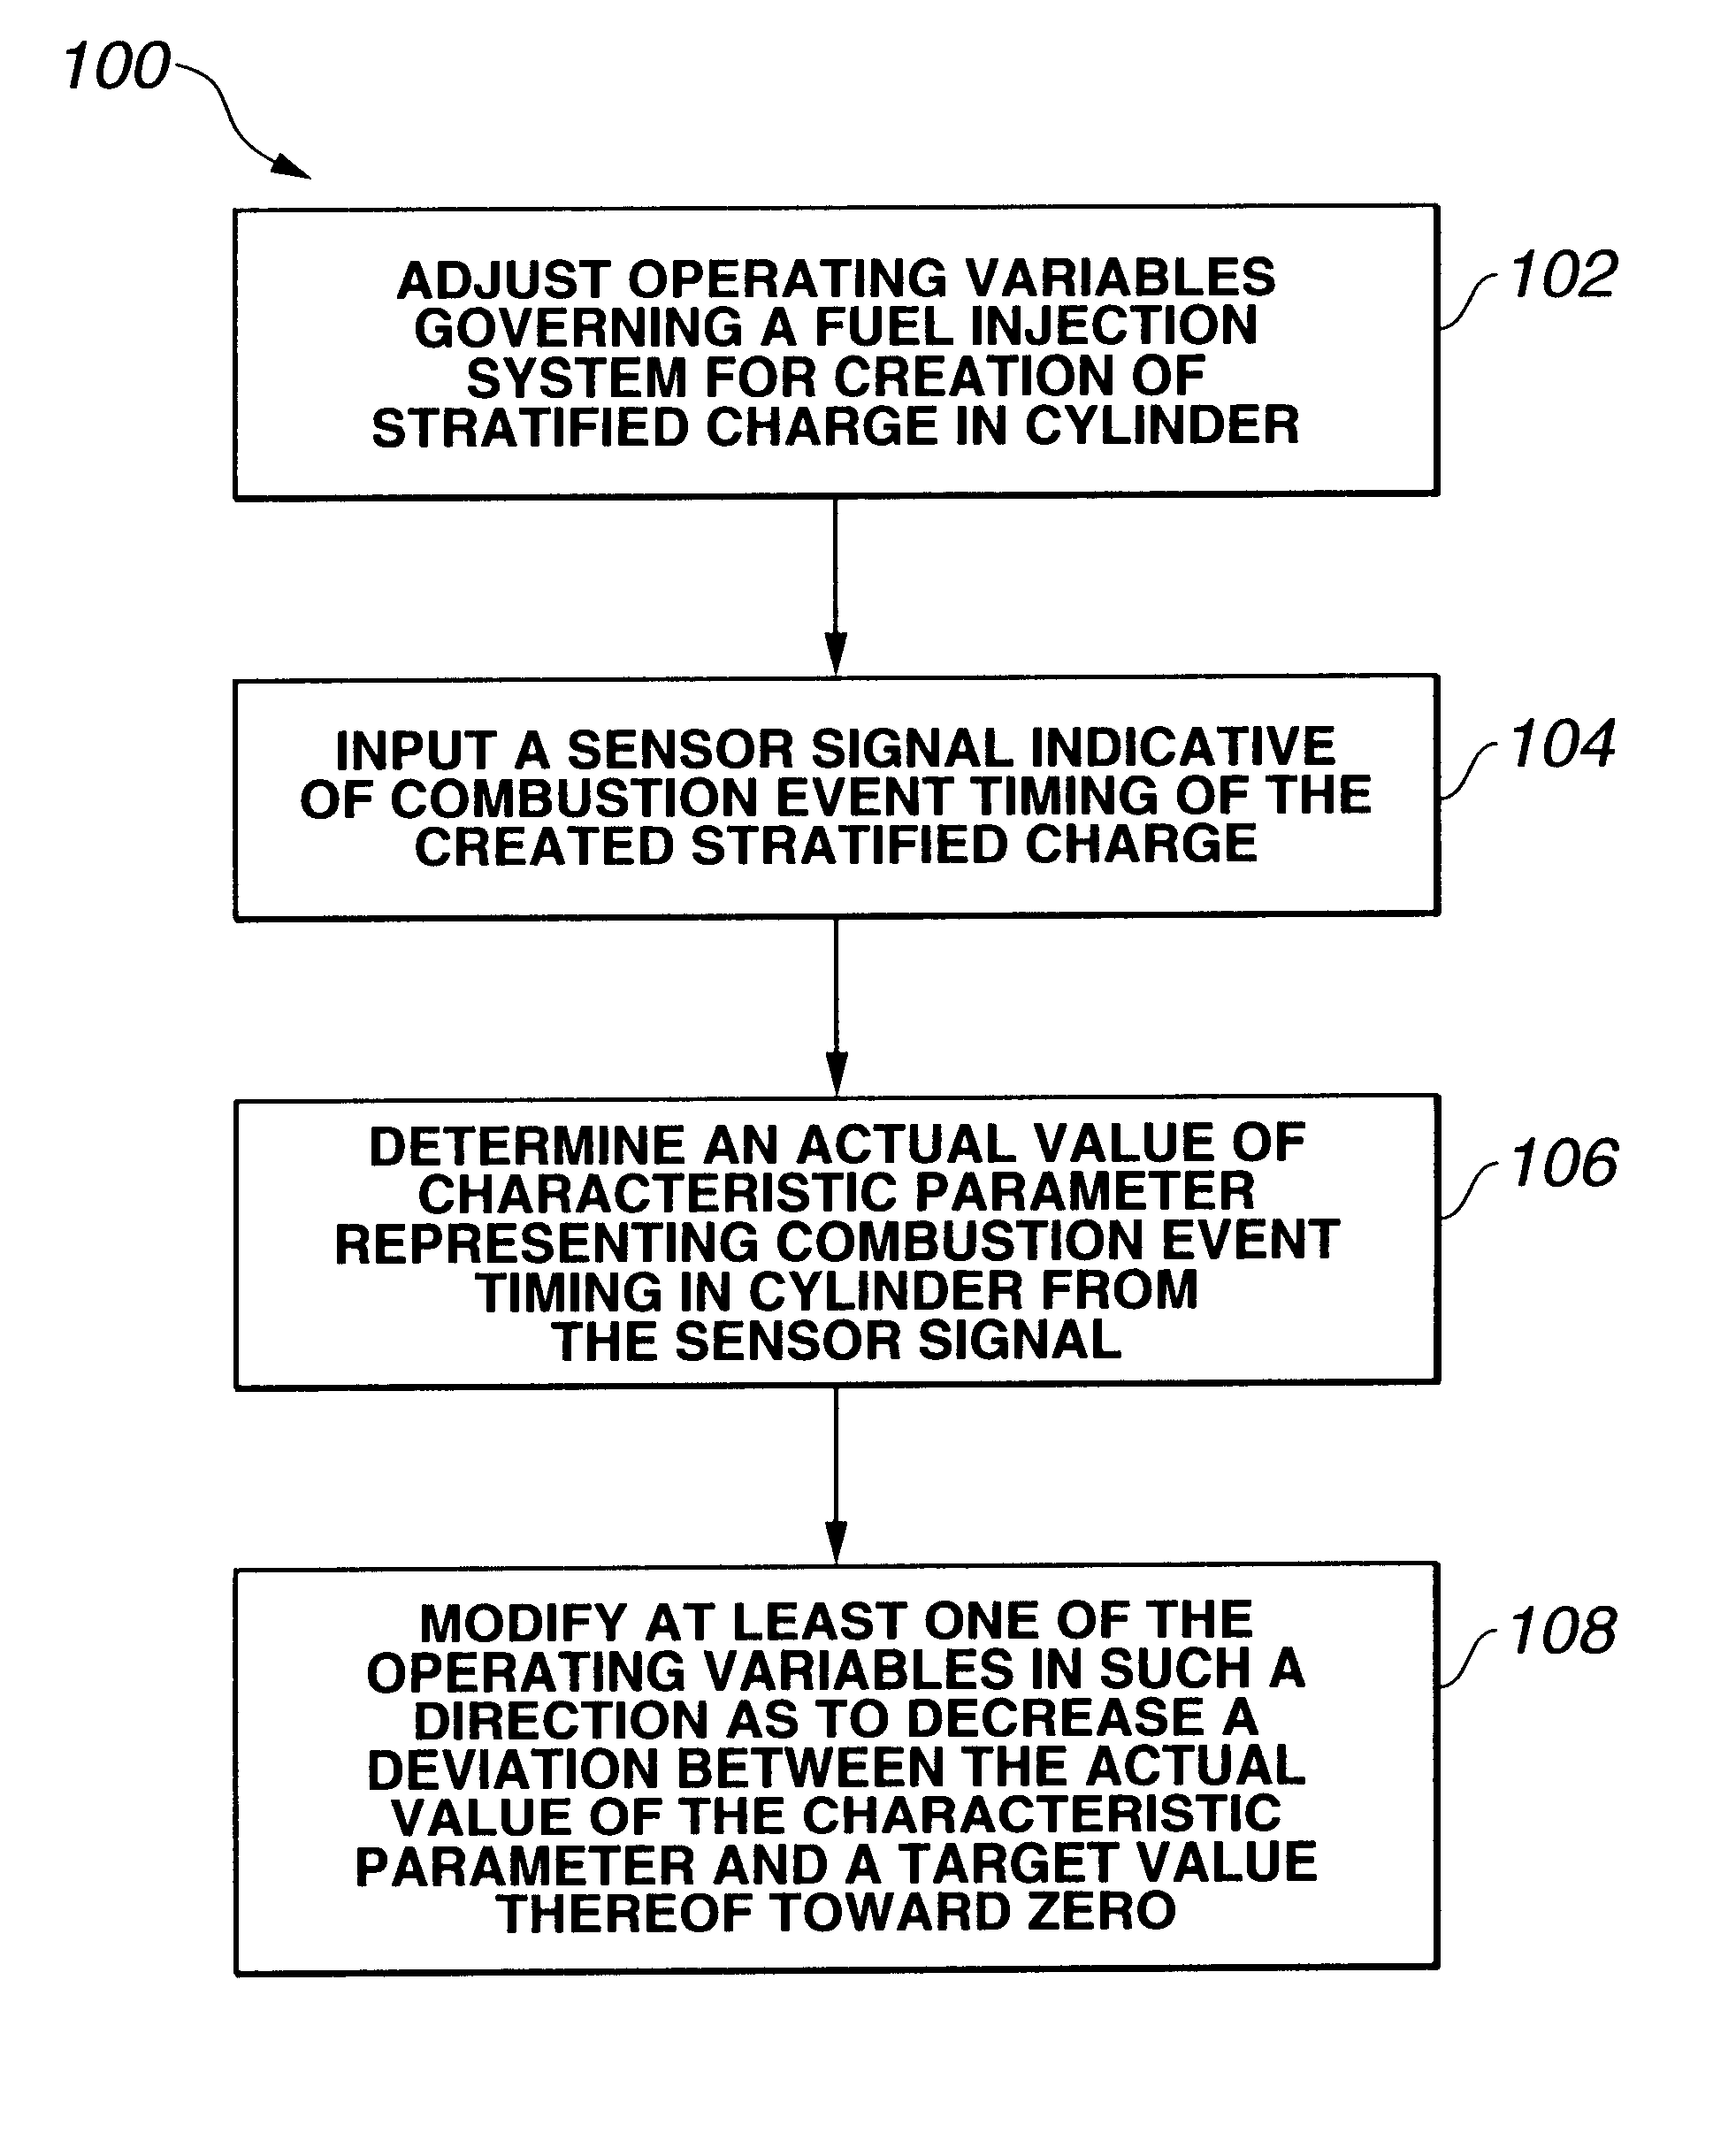 Feedback control for auto-ignition two-stage combustion of gasoline in engine cylinder